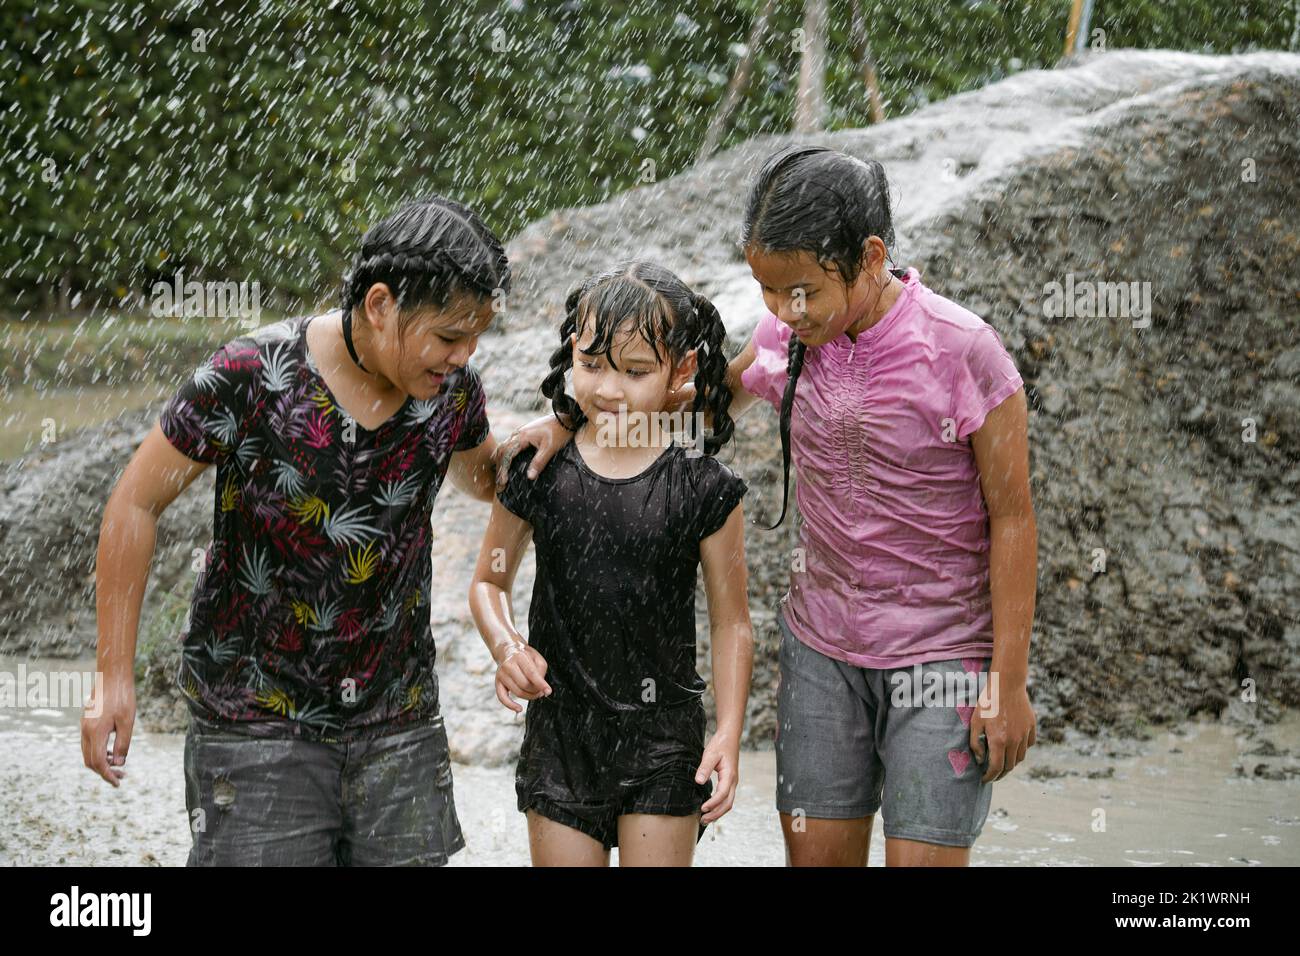 Group of happy children girl playing in wet mud puddle during raining in rainy season Stock Photo